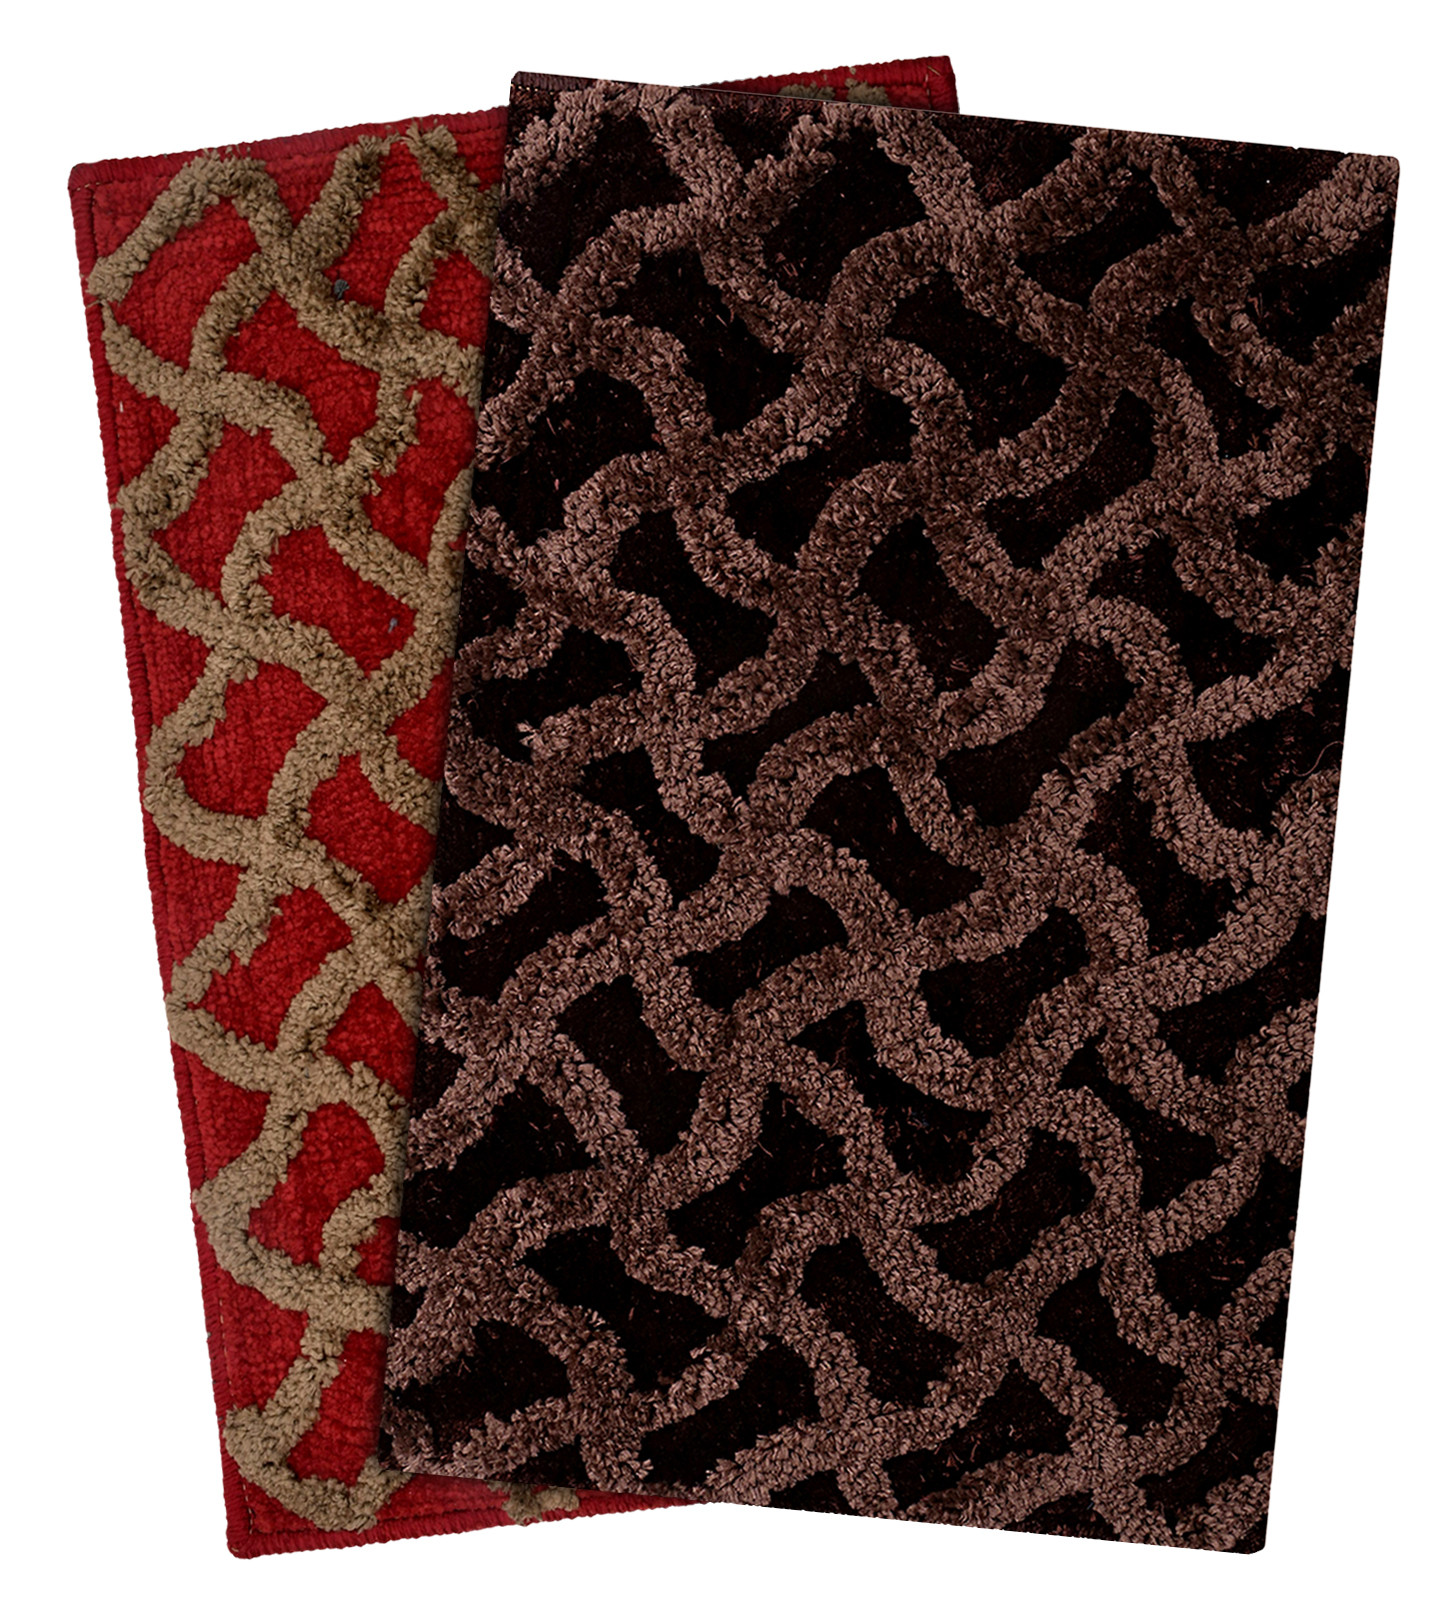 Kuber Industries Soft, lightweigth, Washable, Non Slip Doormat Entrance Rug Dirt Trapper Mat Shoes Scraper for Entry, Patio, Porch- Pack of 2 (Maroon & Dark Brown)